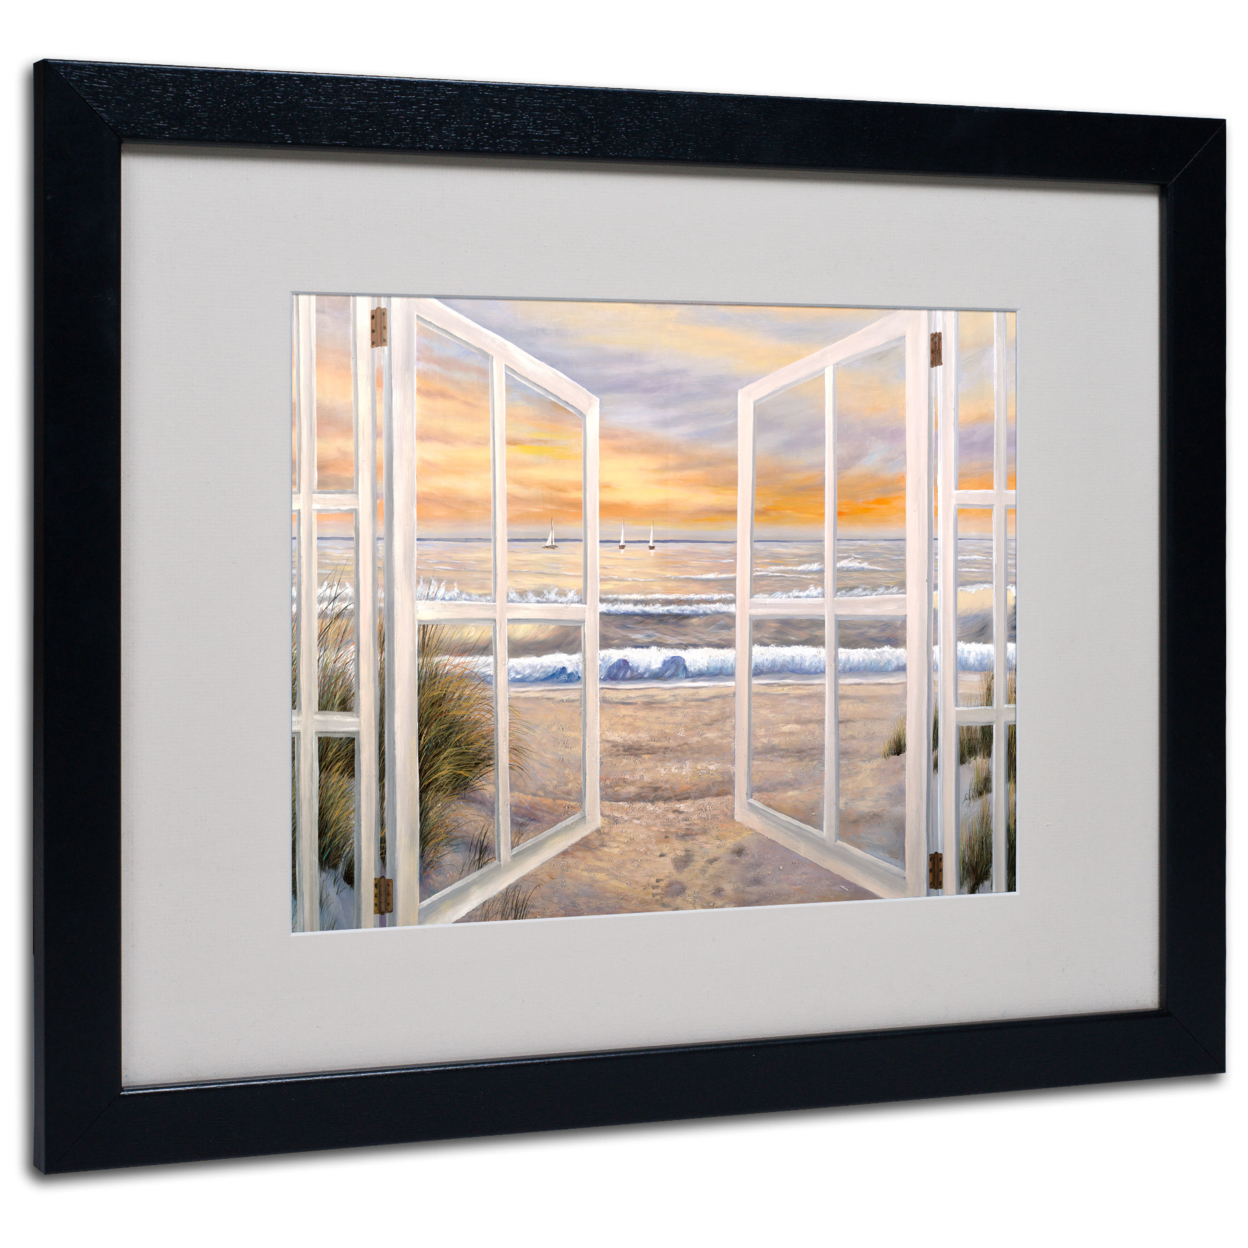 Joval 'Elongated Window' Black Wooden Framed Art 18 X 22 Inches